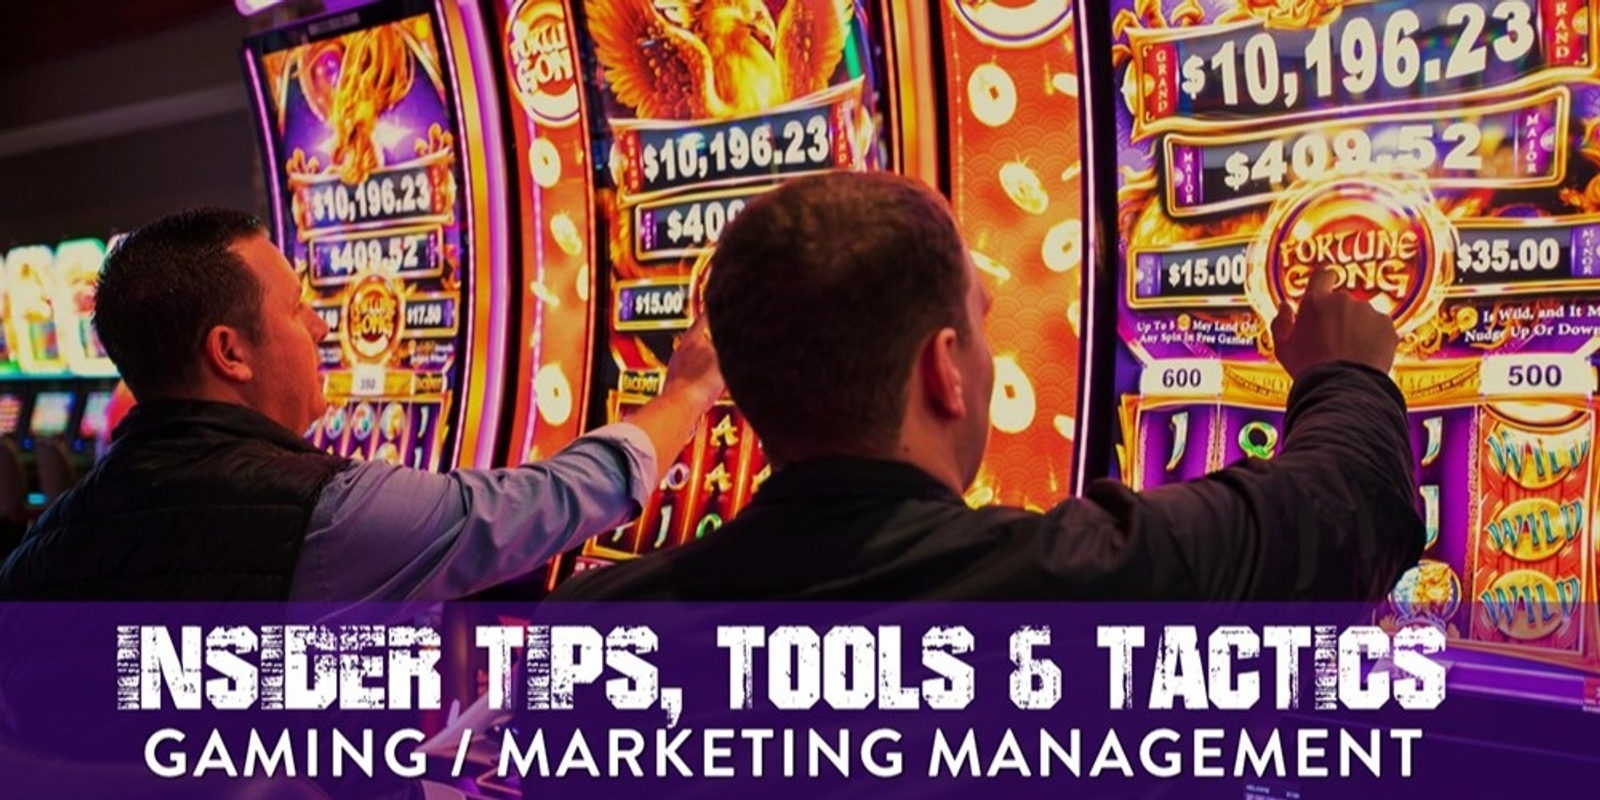 Banner image for TIPS, TOOLS & TACTICS FOR GAMING/MARKETING MANAGEMENT